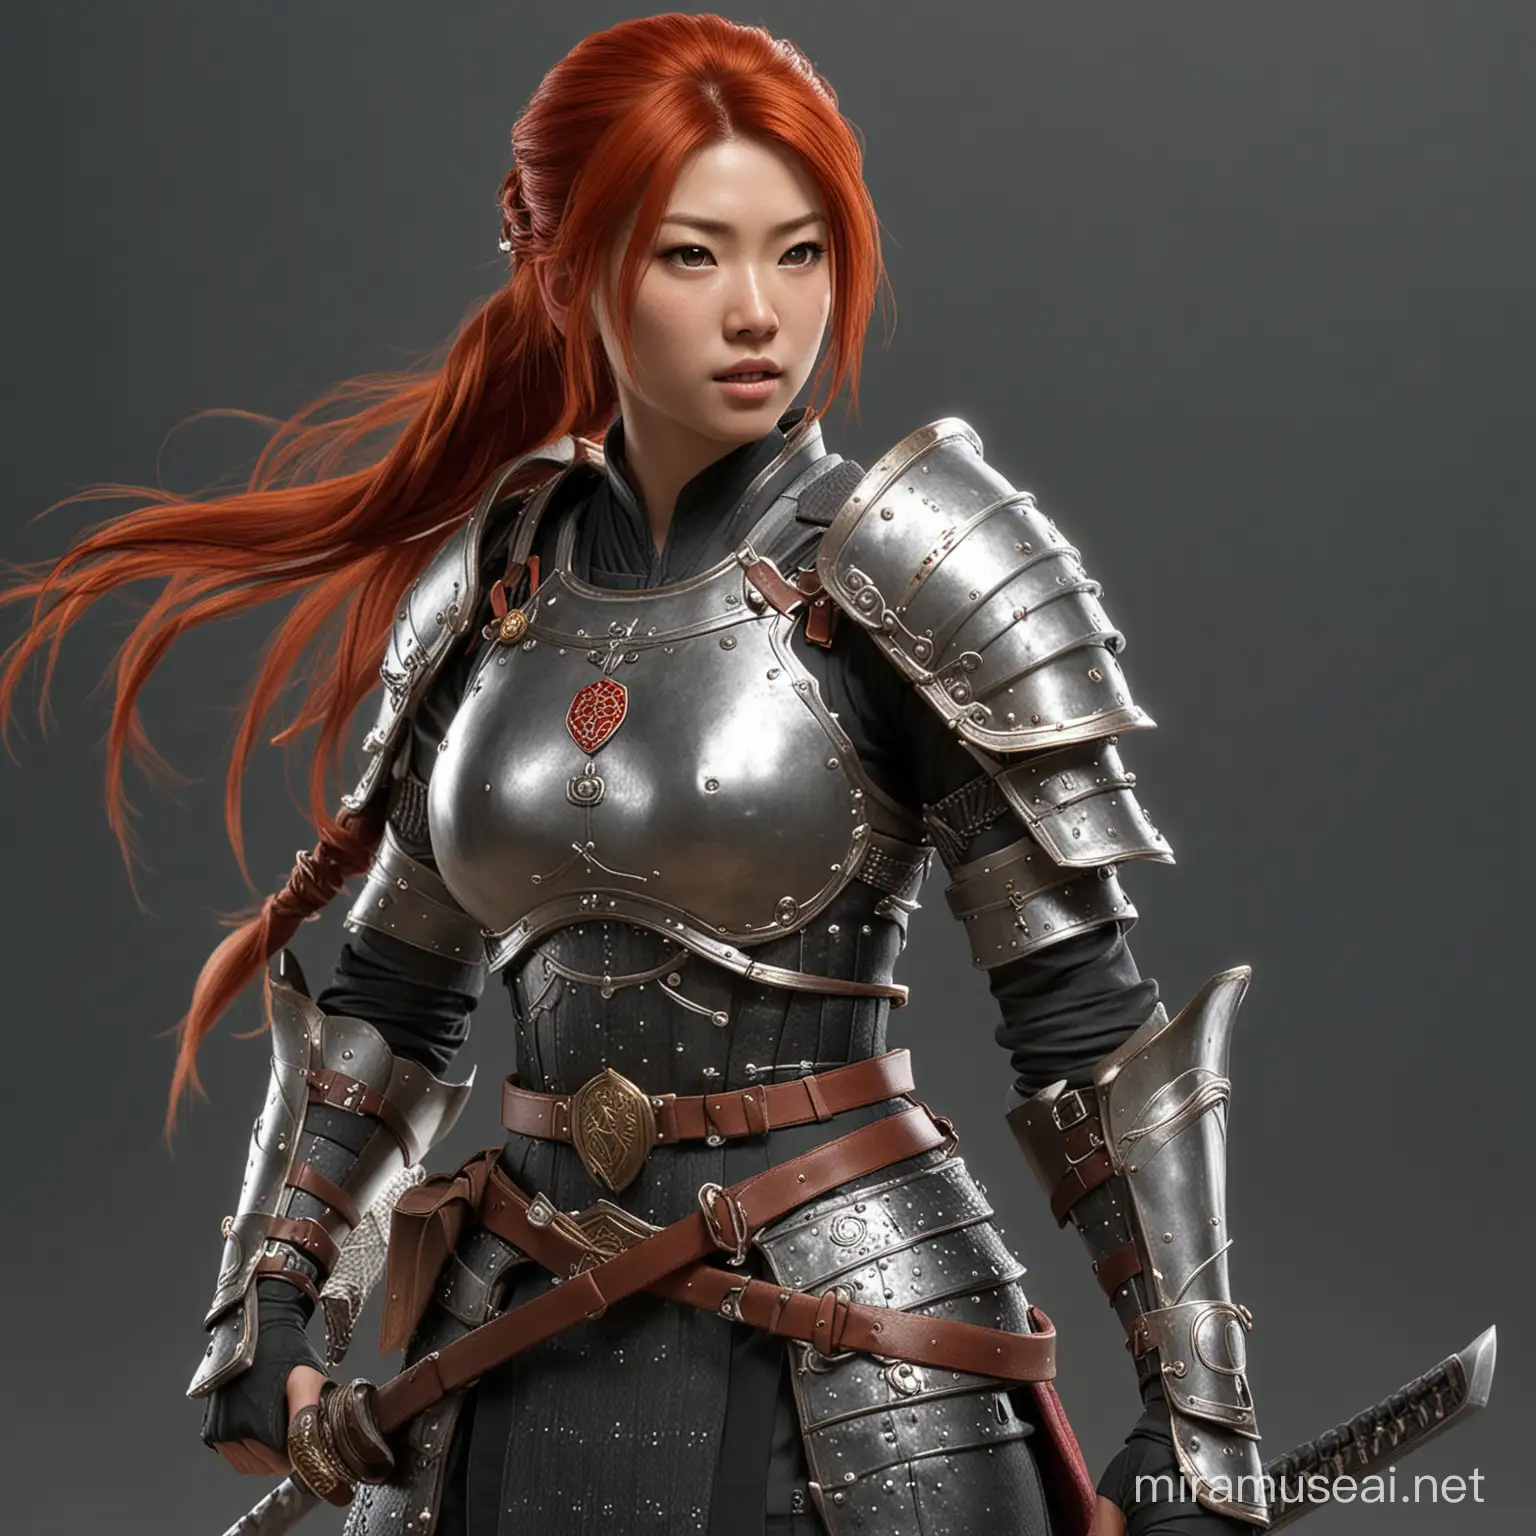 RedHaired Asian Cleric in Splint Mail Armor with Katana and Shield